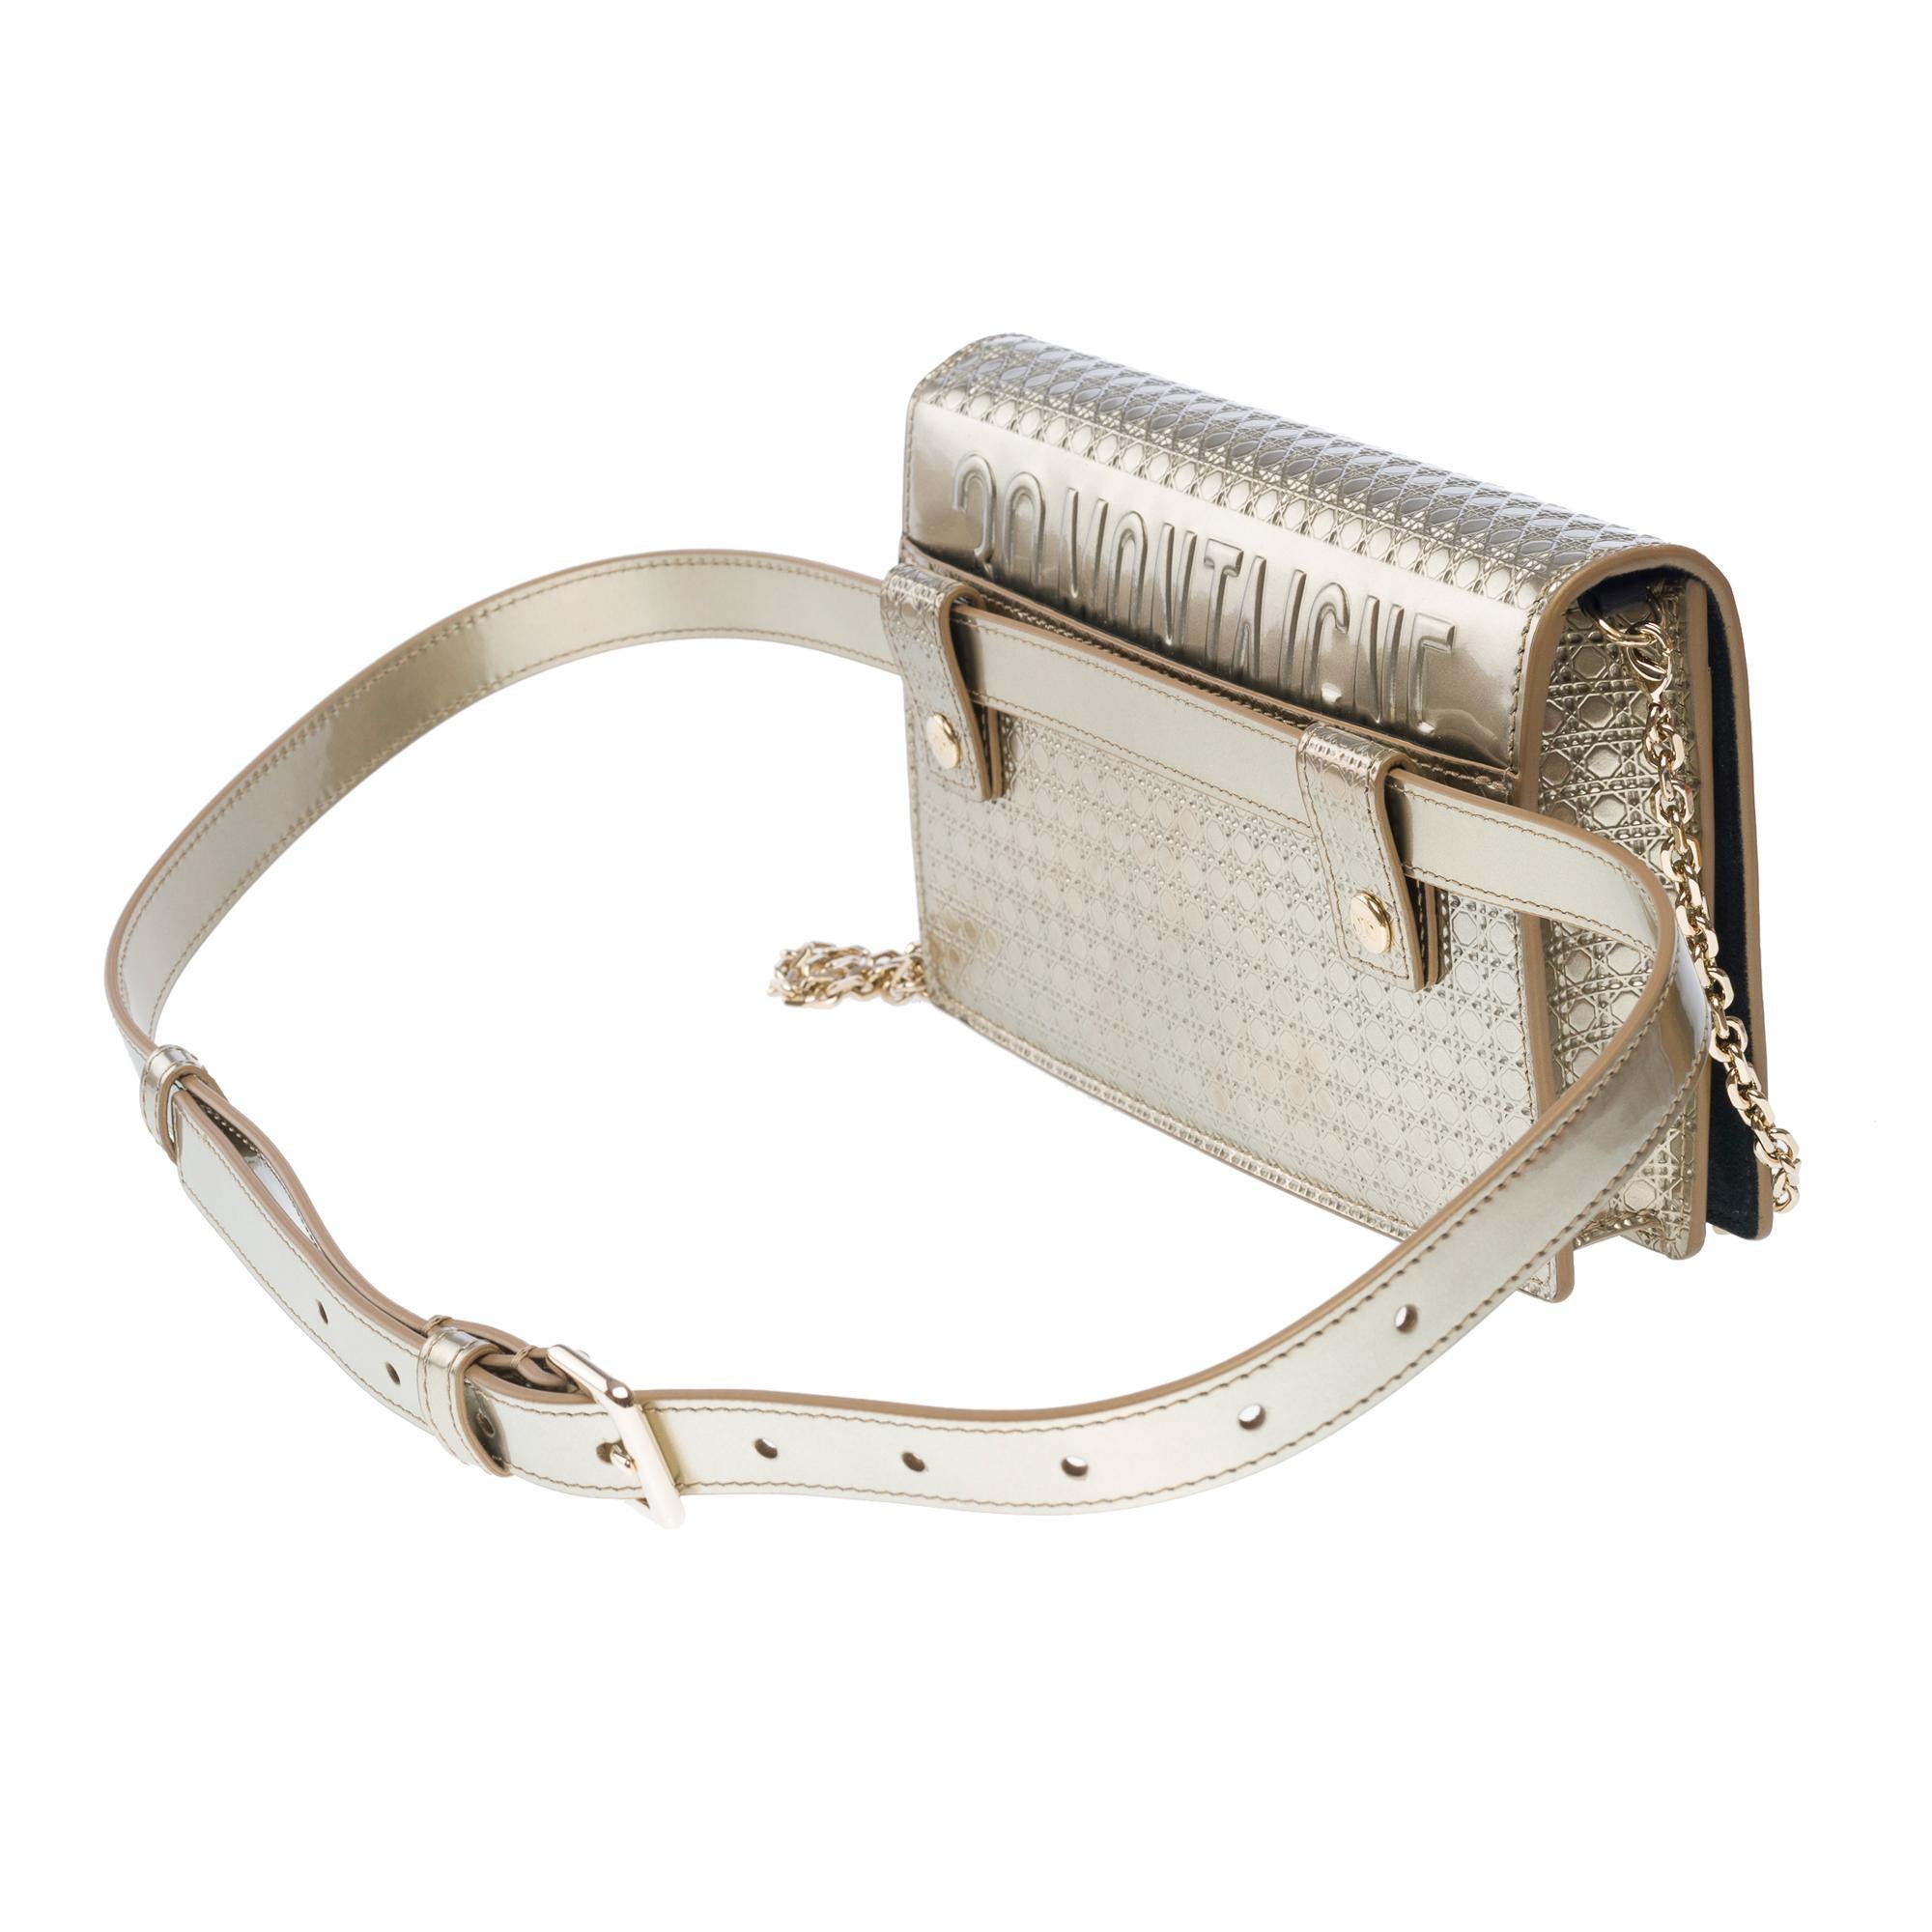 Christian Dior shoulder&belt bag 2 in 1 30 Montaigne in silver leather For Sale 3